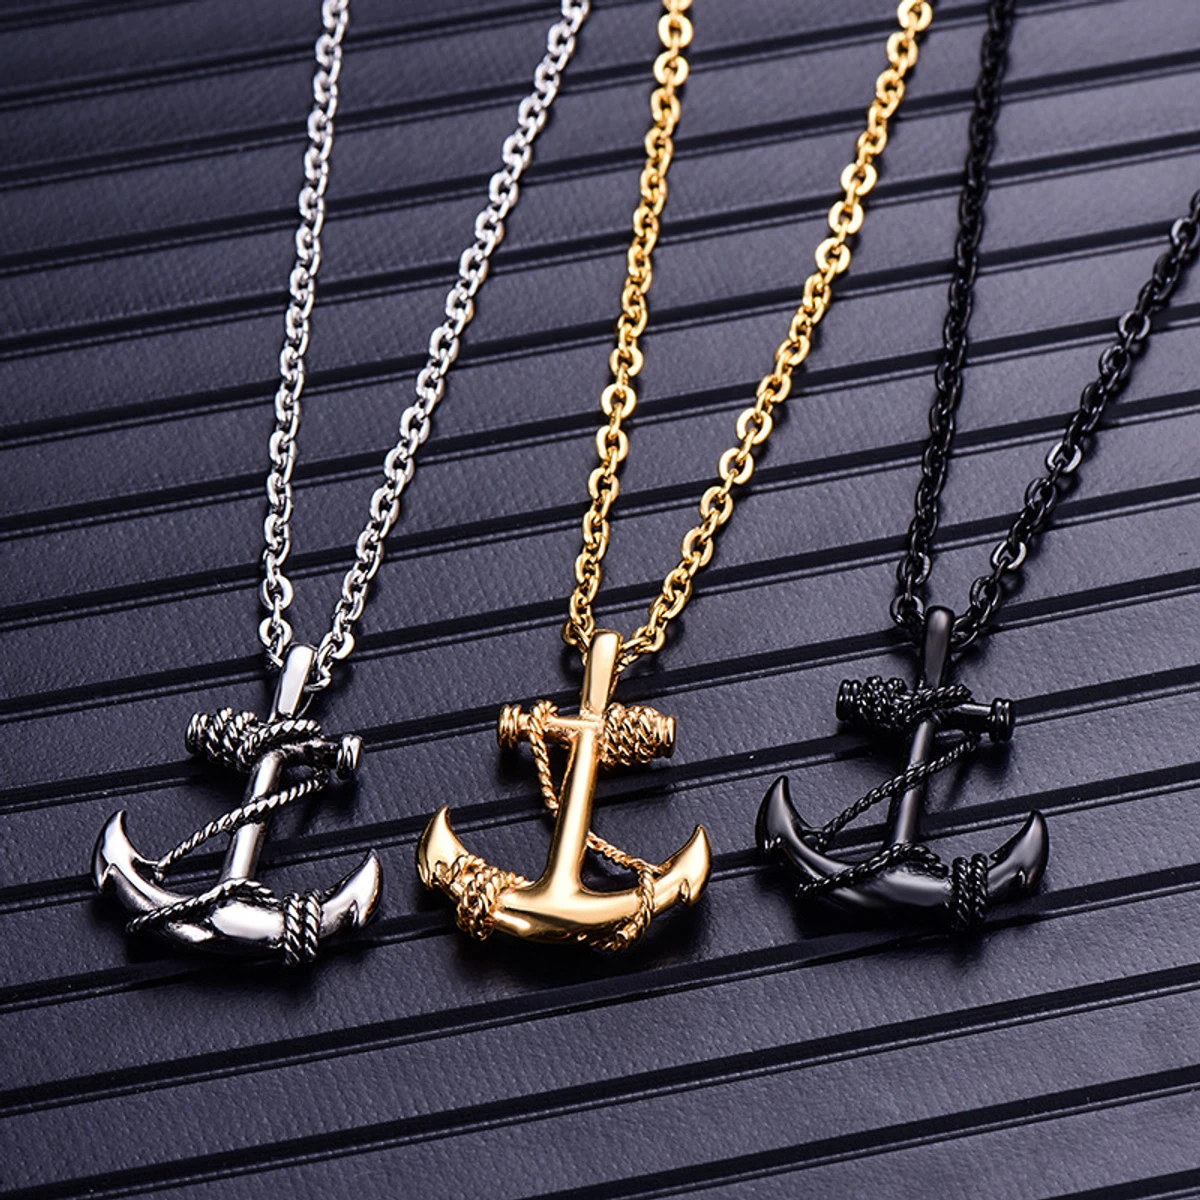 Stainless Steel Anchor Necklaces Chain Punk Rock Necklaces for For Men